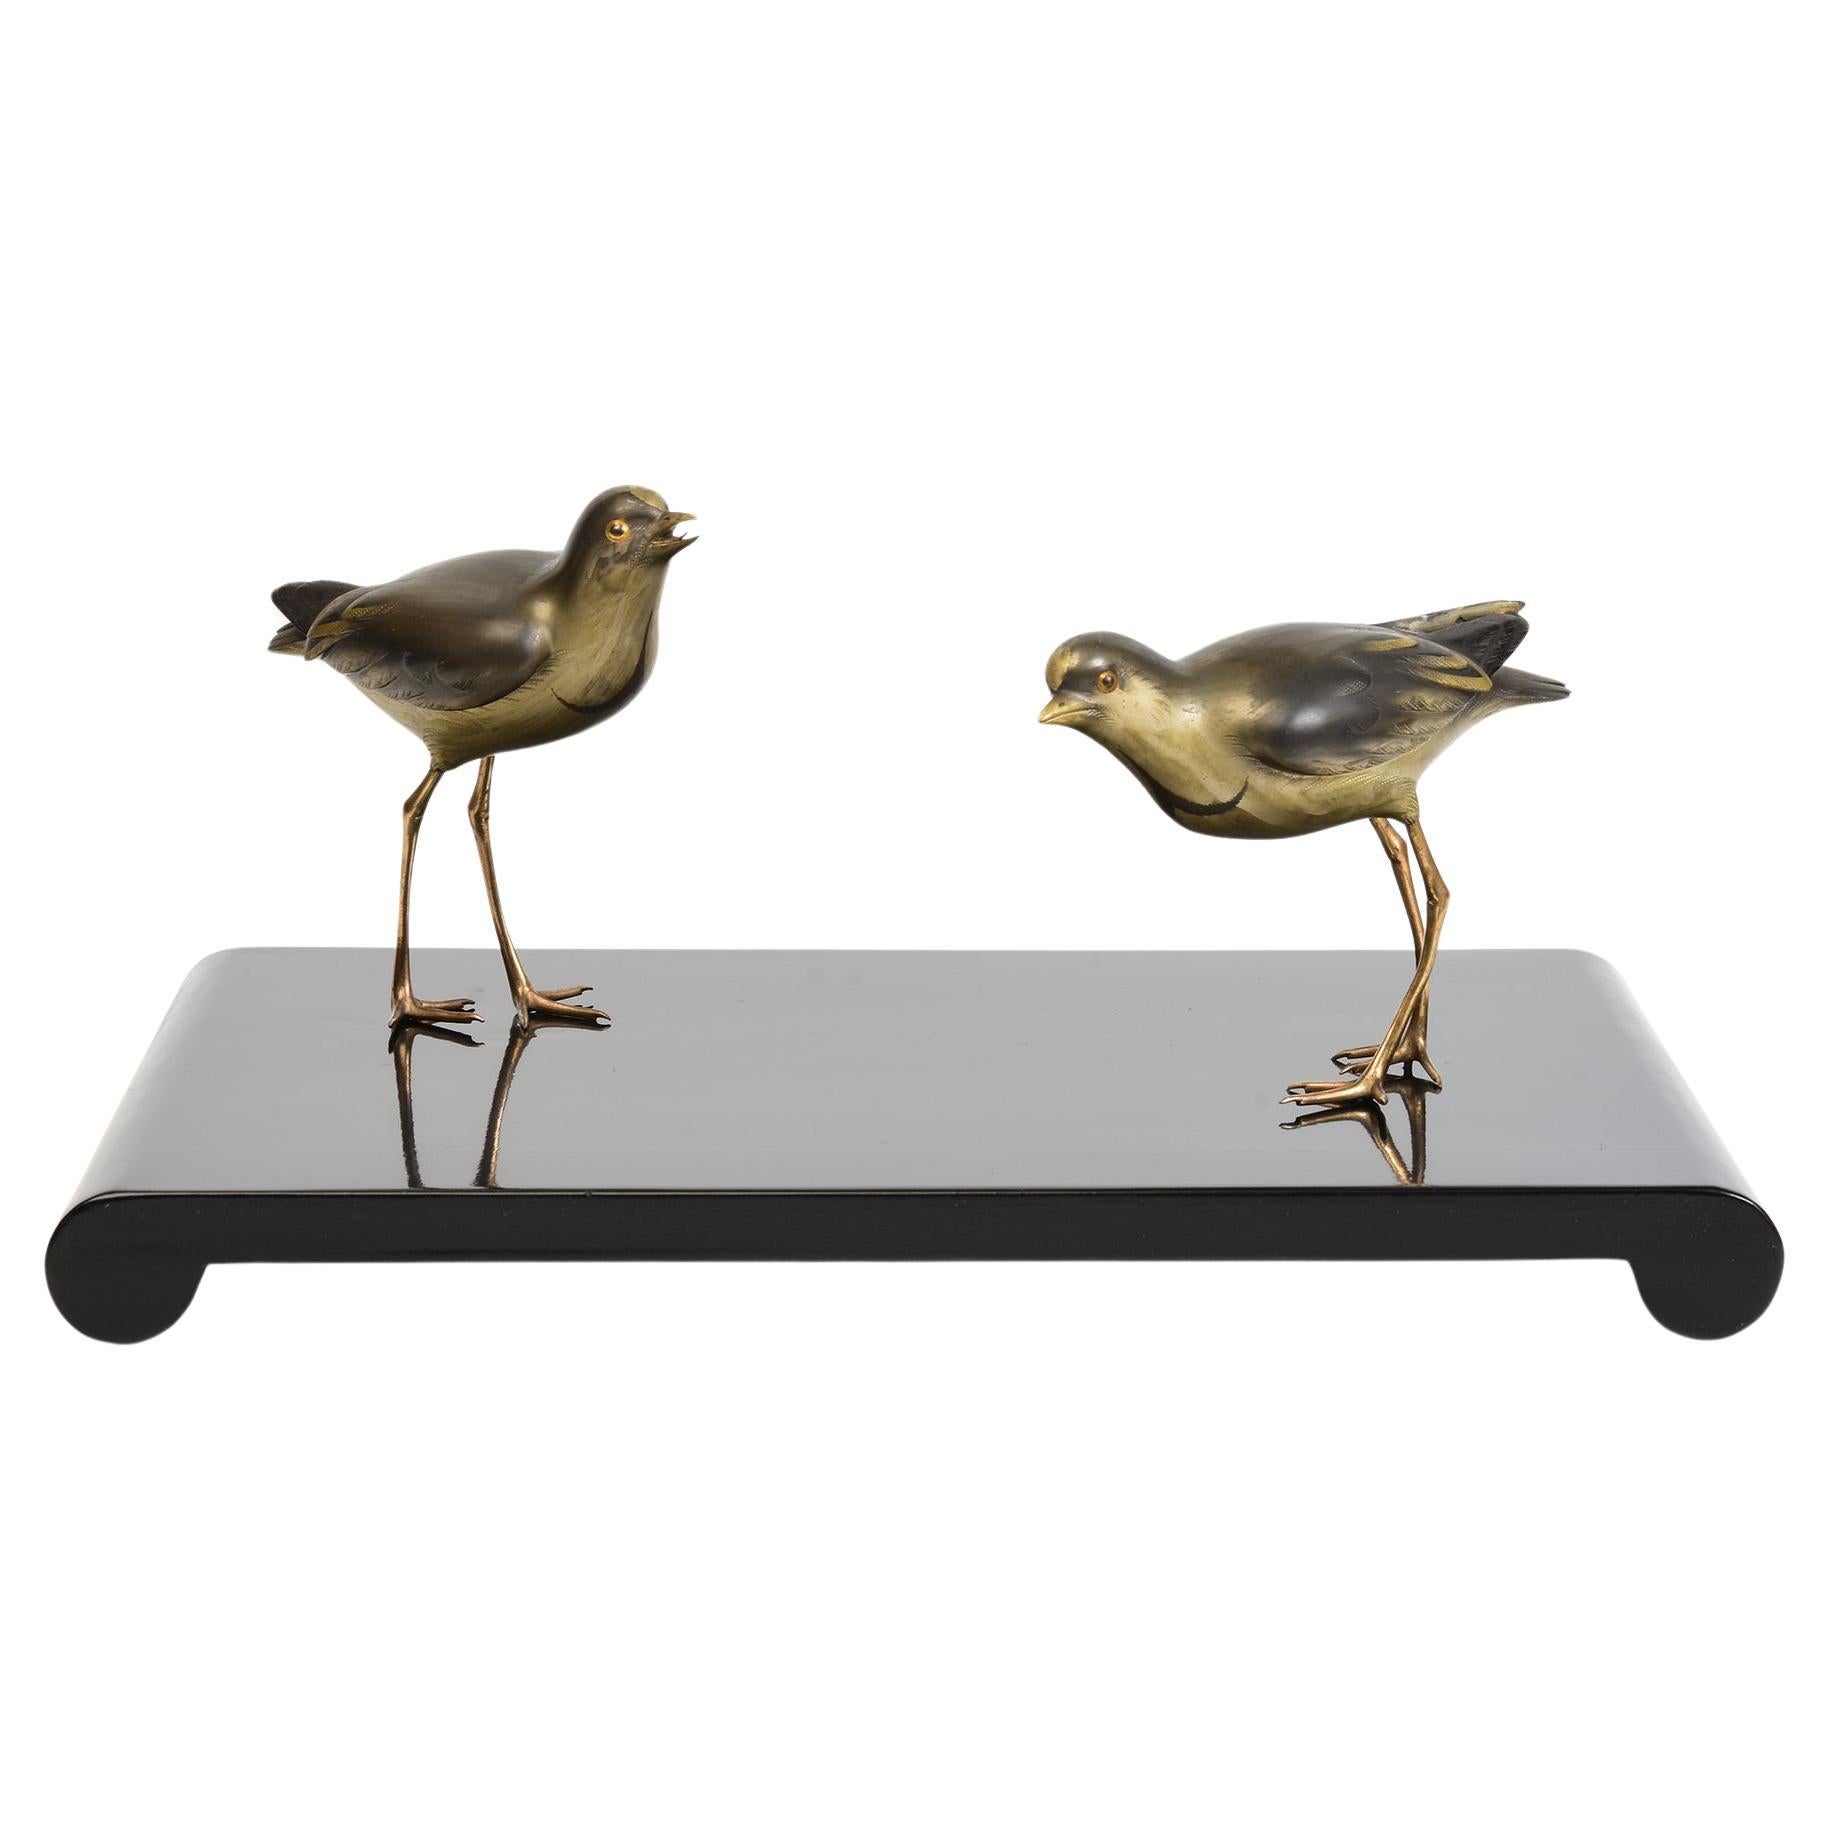 Early 20th C., Showa, A Pair of Japanese Bronze Standing Birds with Artist Sign